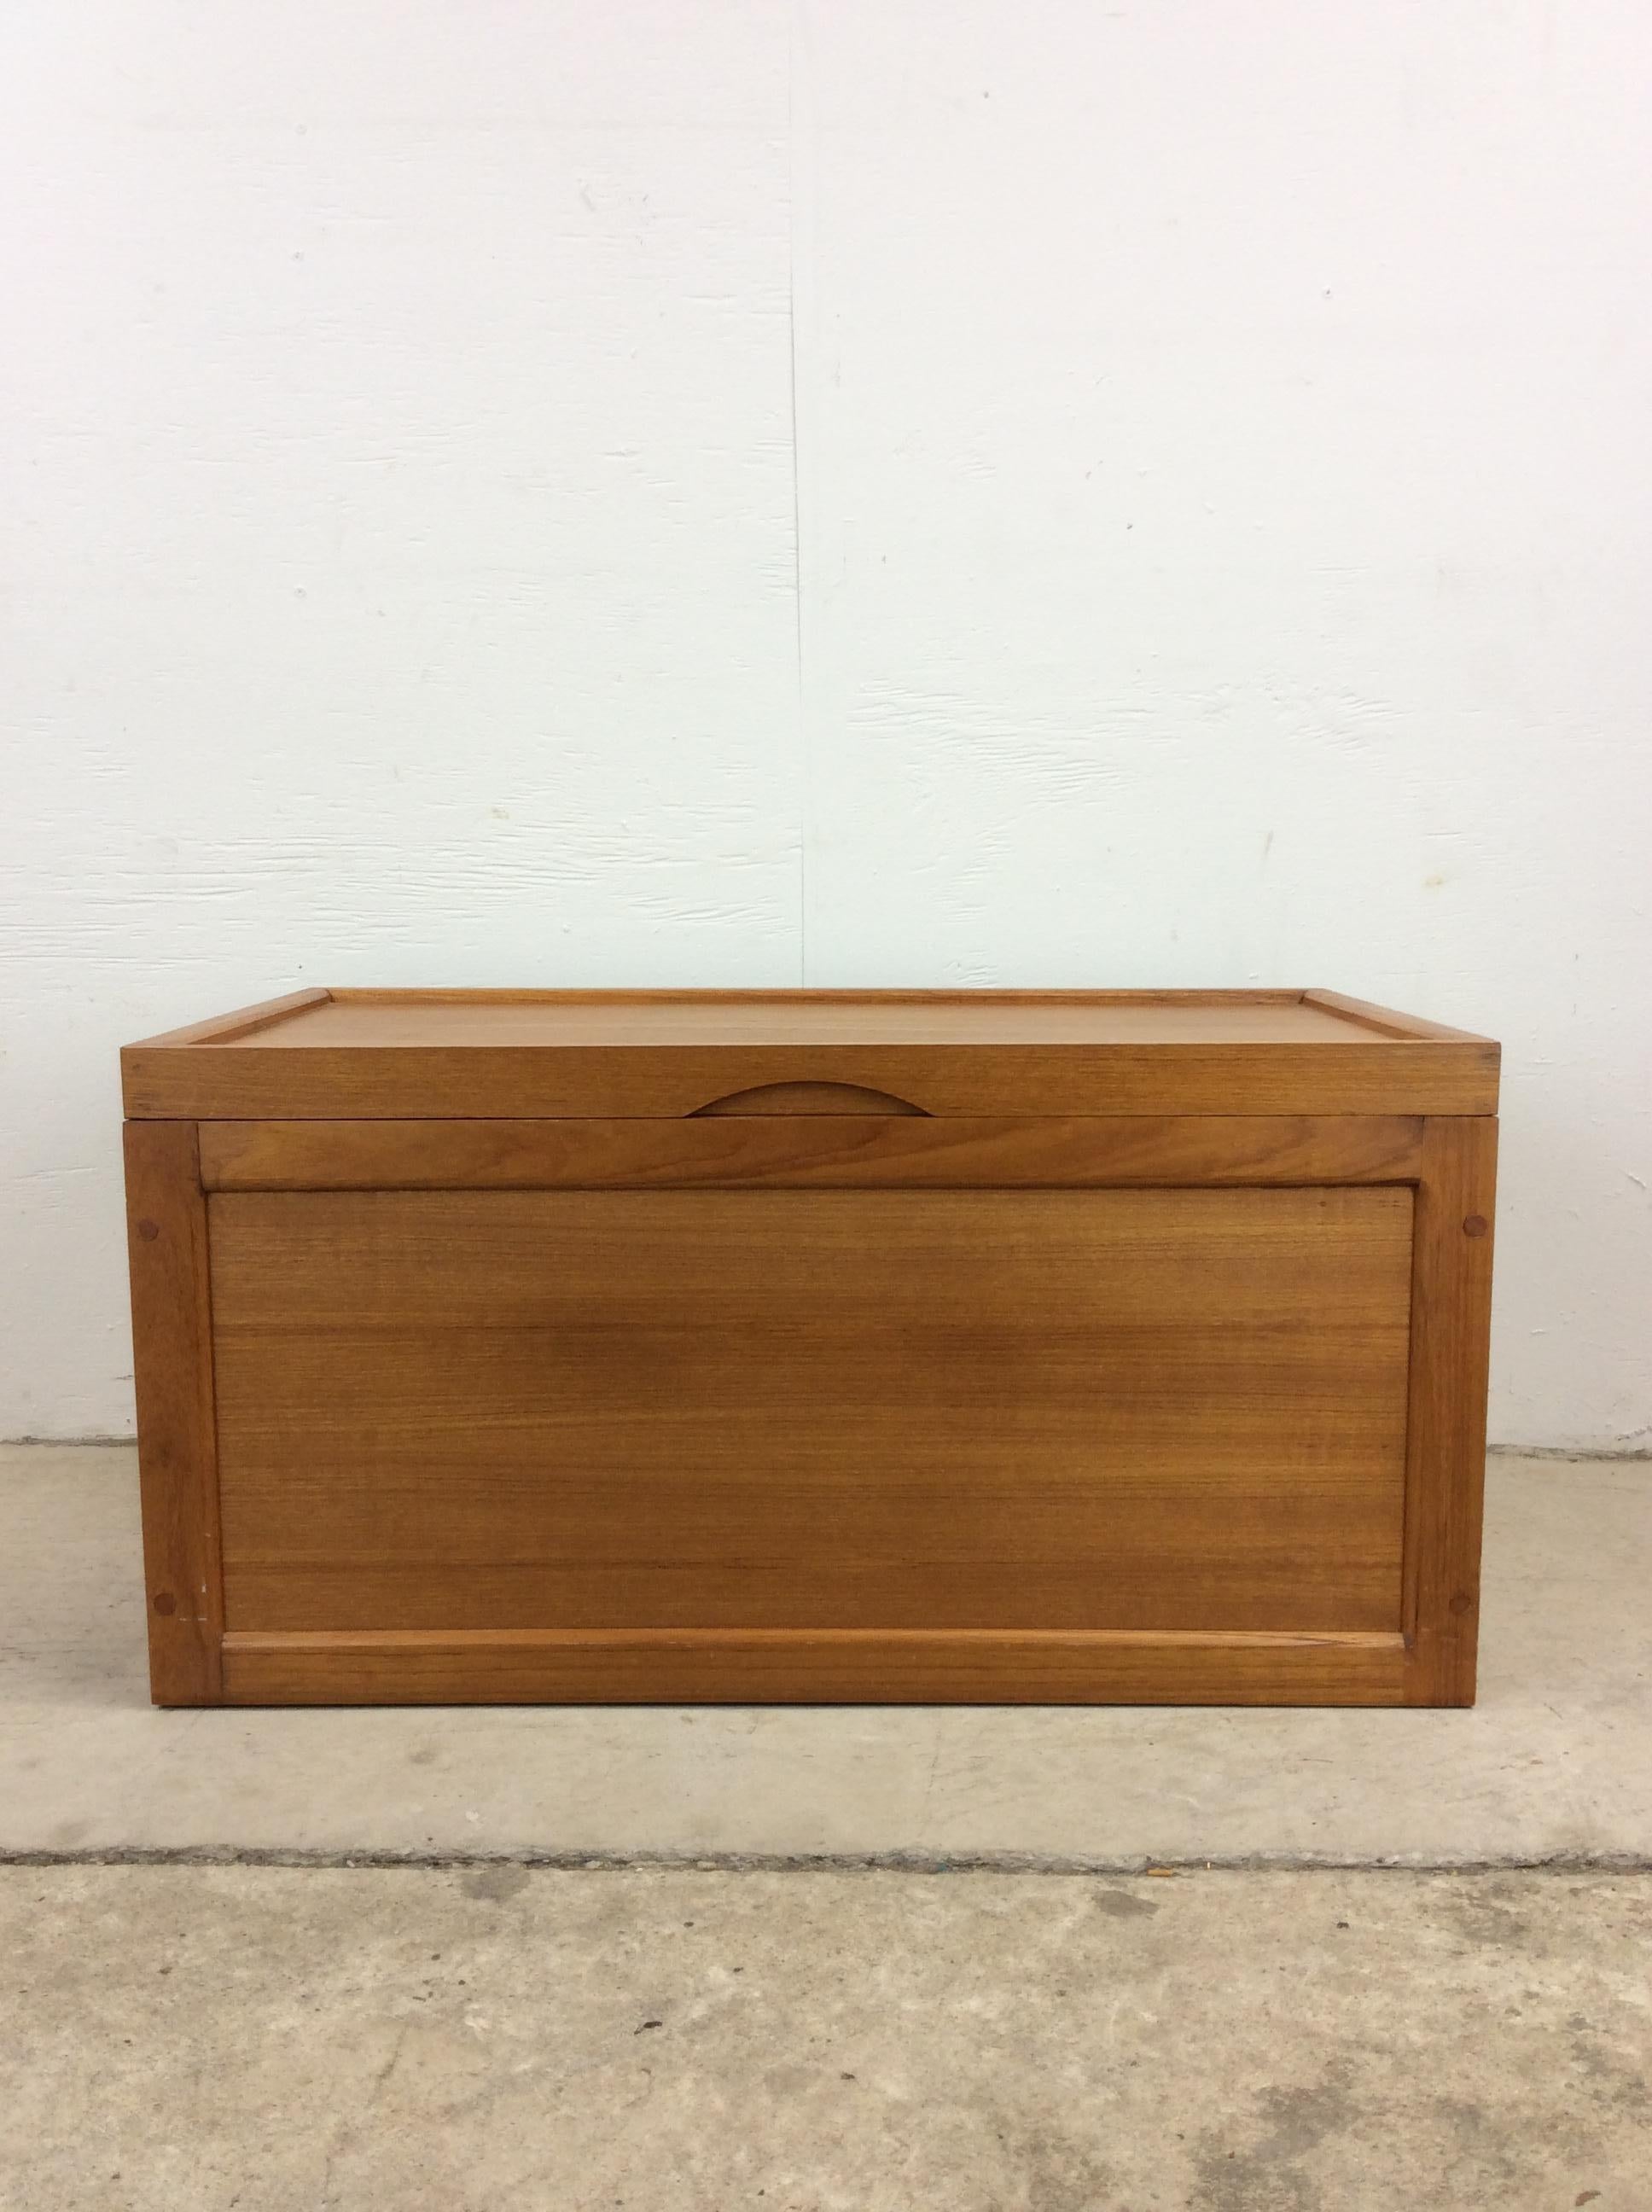 This Scandinavian Modern style blanket chest features solid teak construction, brass accented hinges, and a carved pull.  There is stainless hardware included (presumably to ease the way the lid closes) that is new in packaging but was not installed